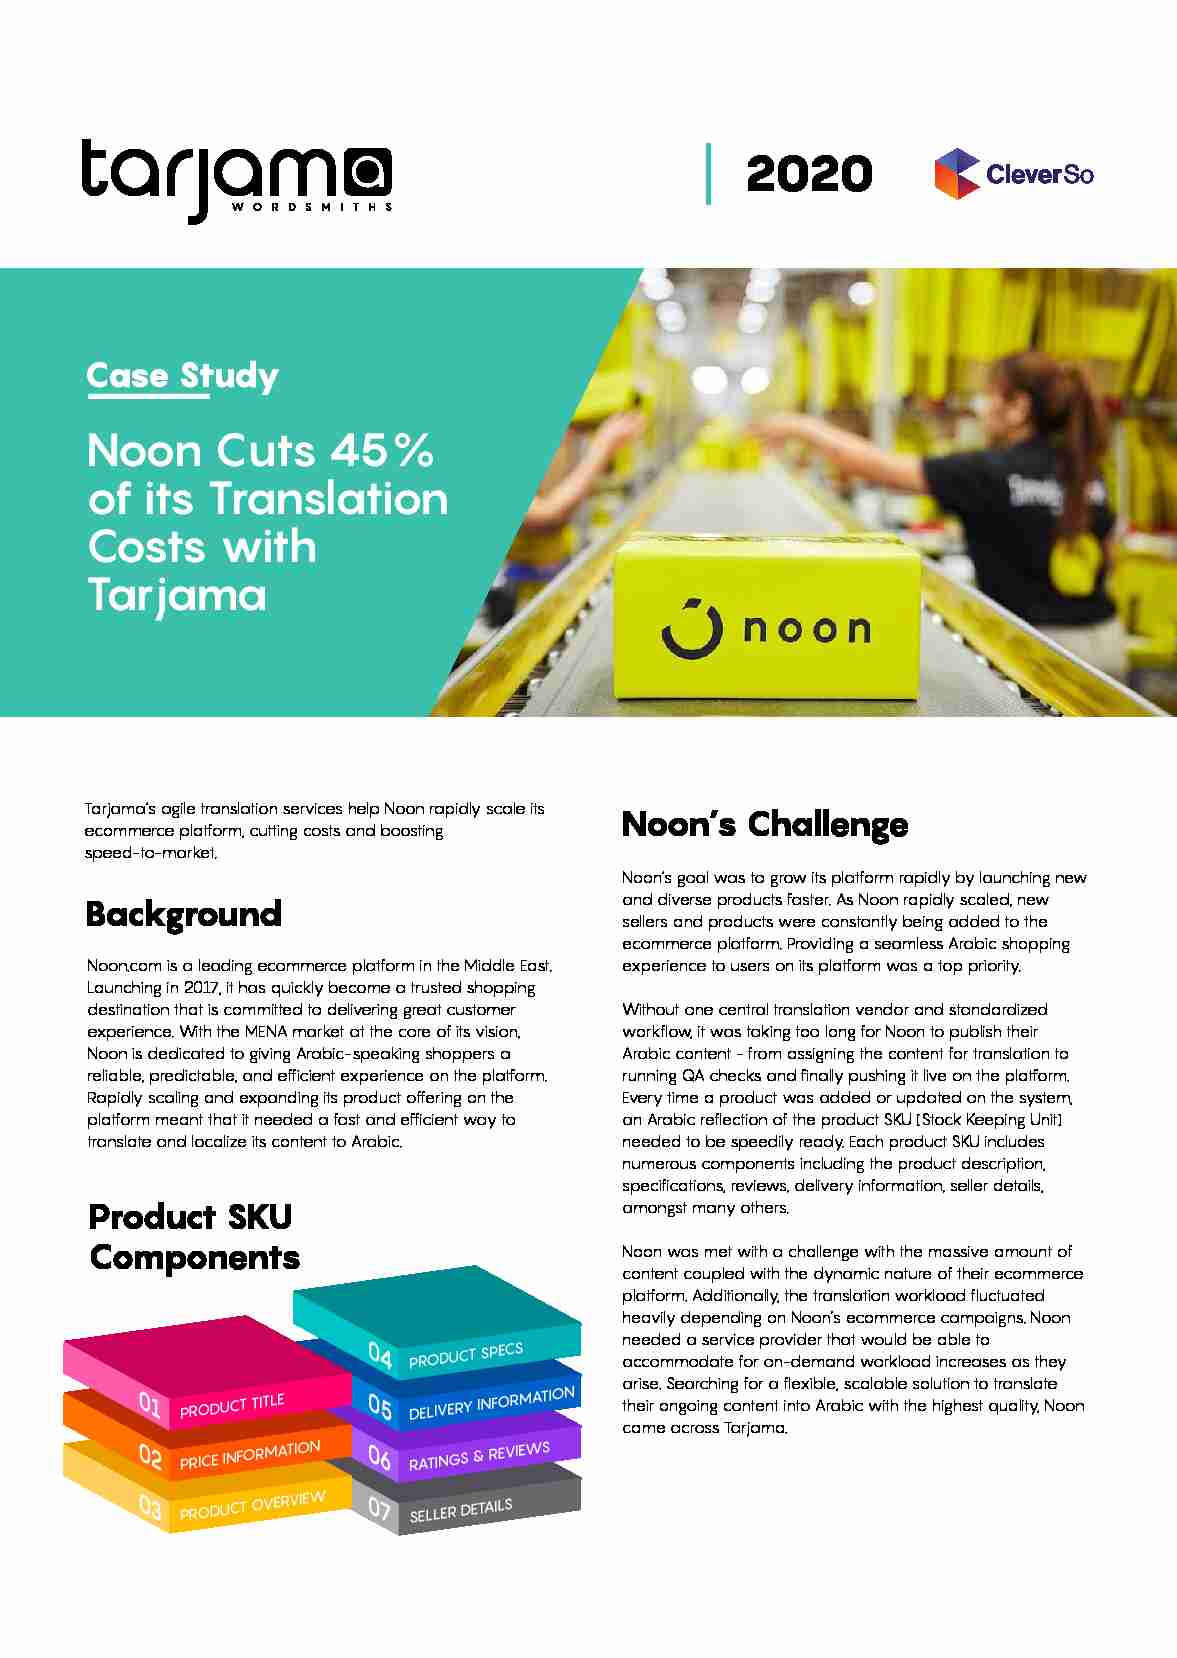 Noon Cuts 45% of its Translation Costs with Tarjama